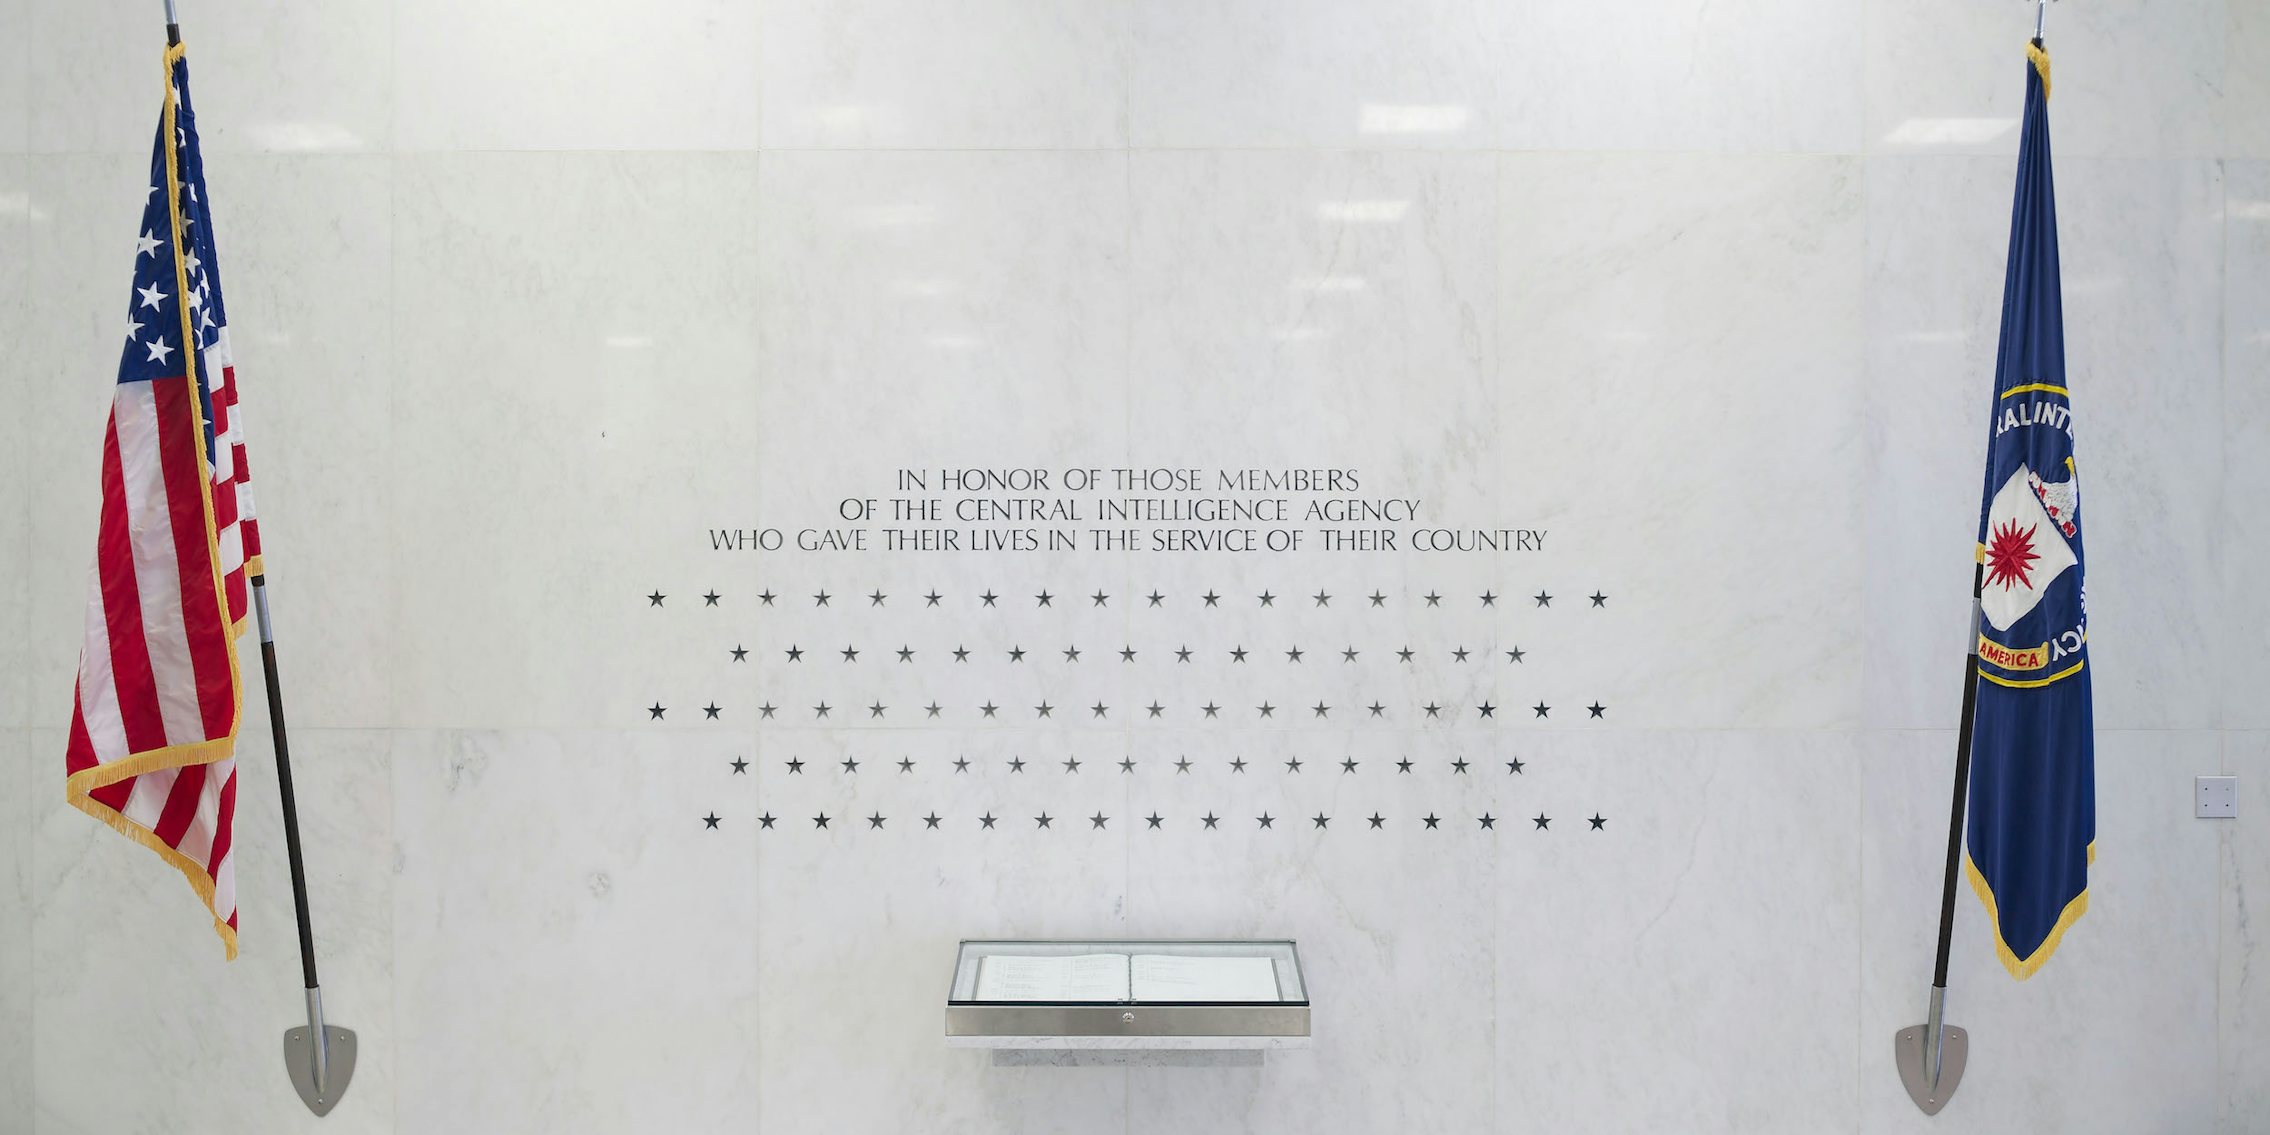 Memorial Wall located in the Central Intelligence Agency's Original Headquarters Building lobby.